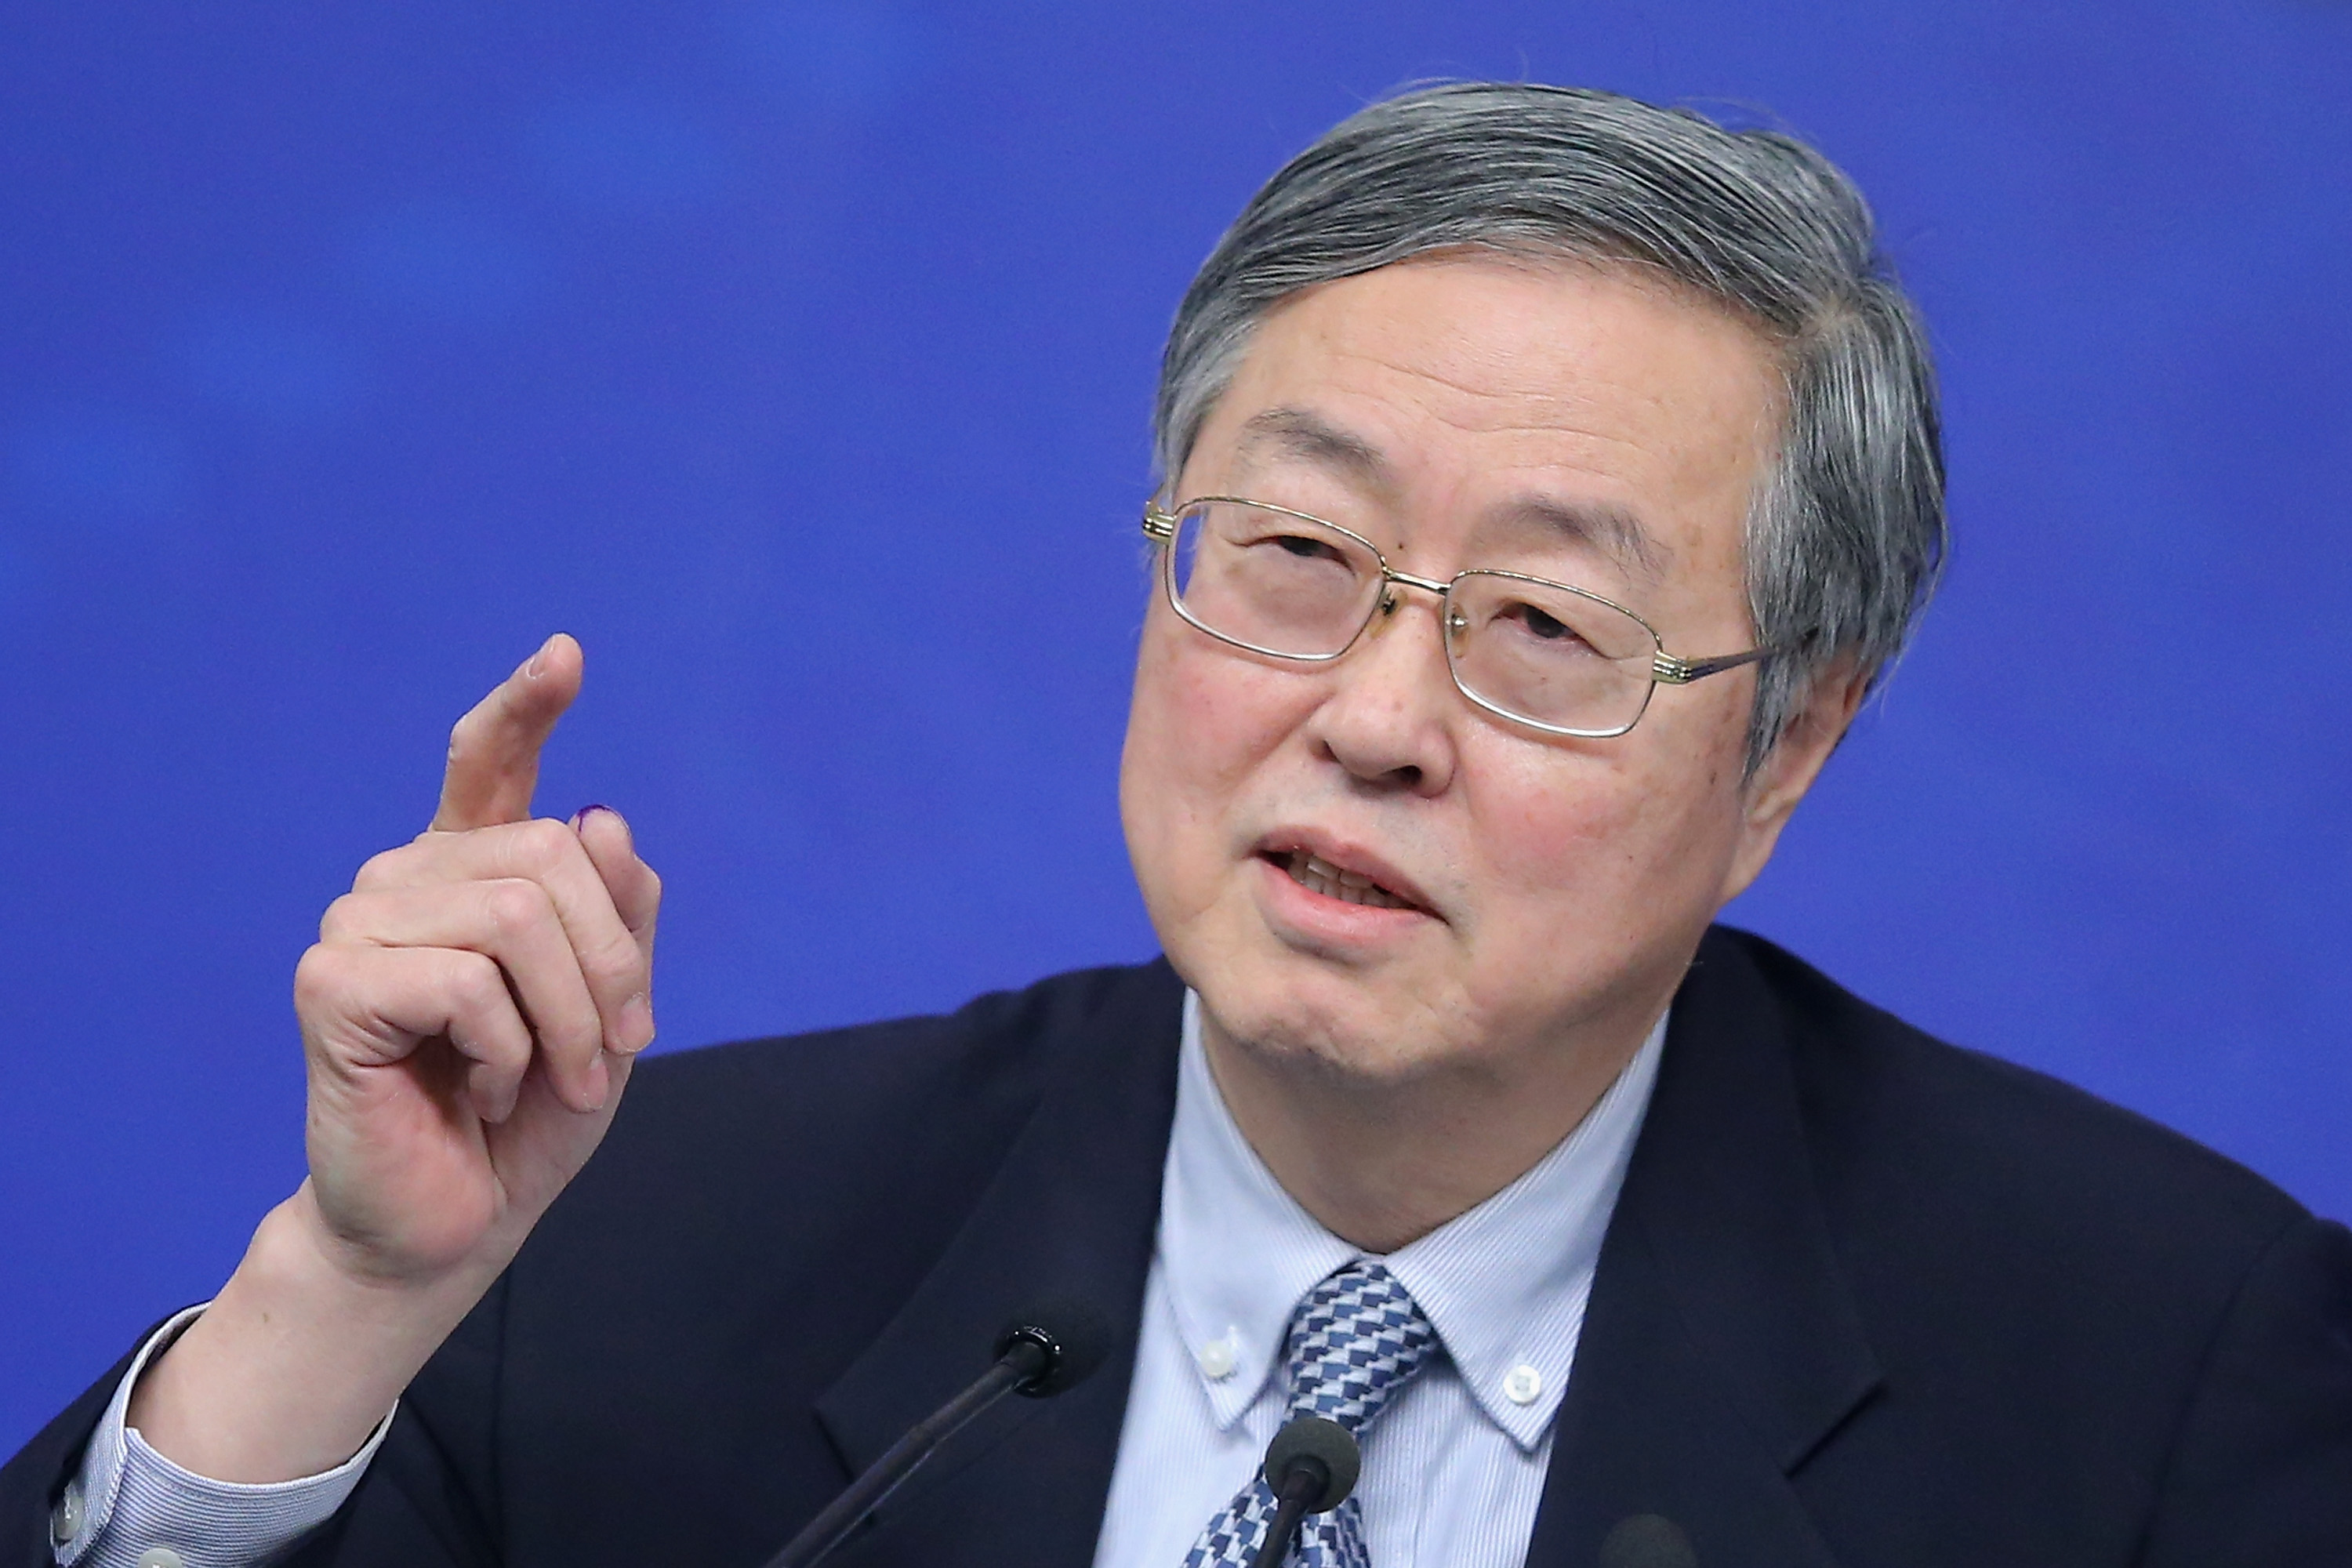 China’s Central Bank Chief Warns of ‘Sudden, Contagious and Hazardous’ Financial Risks